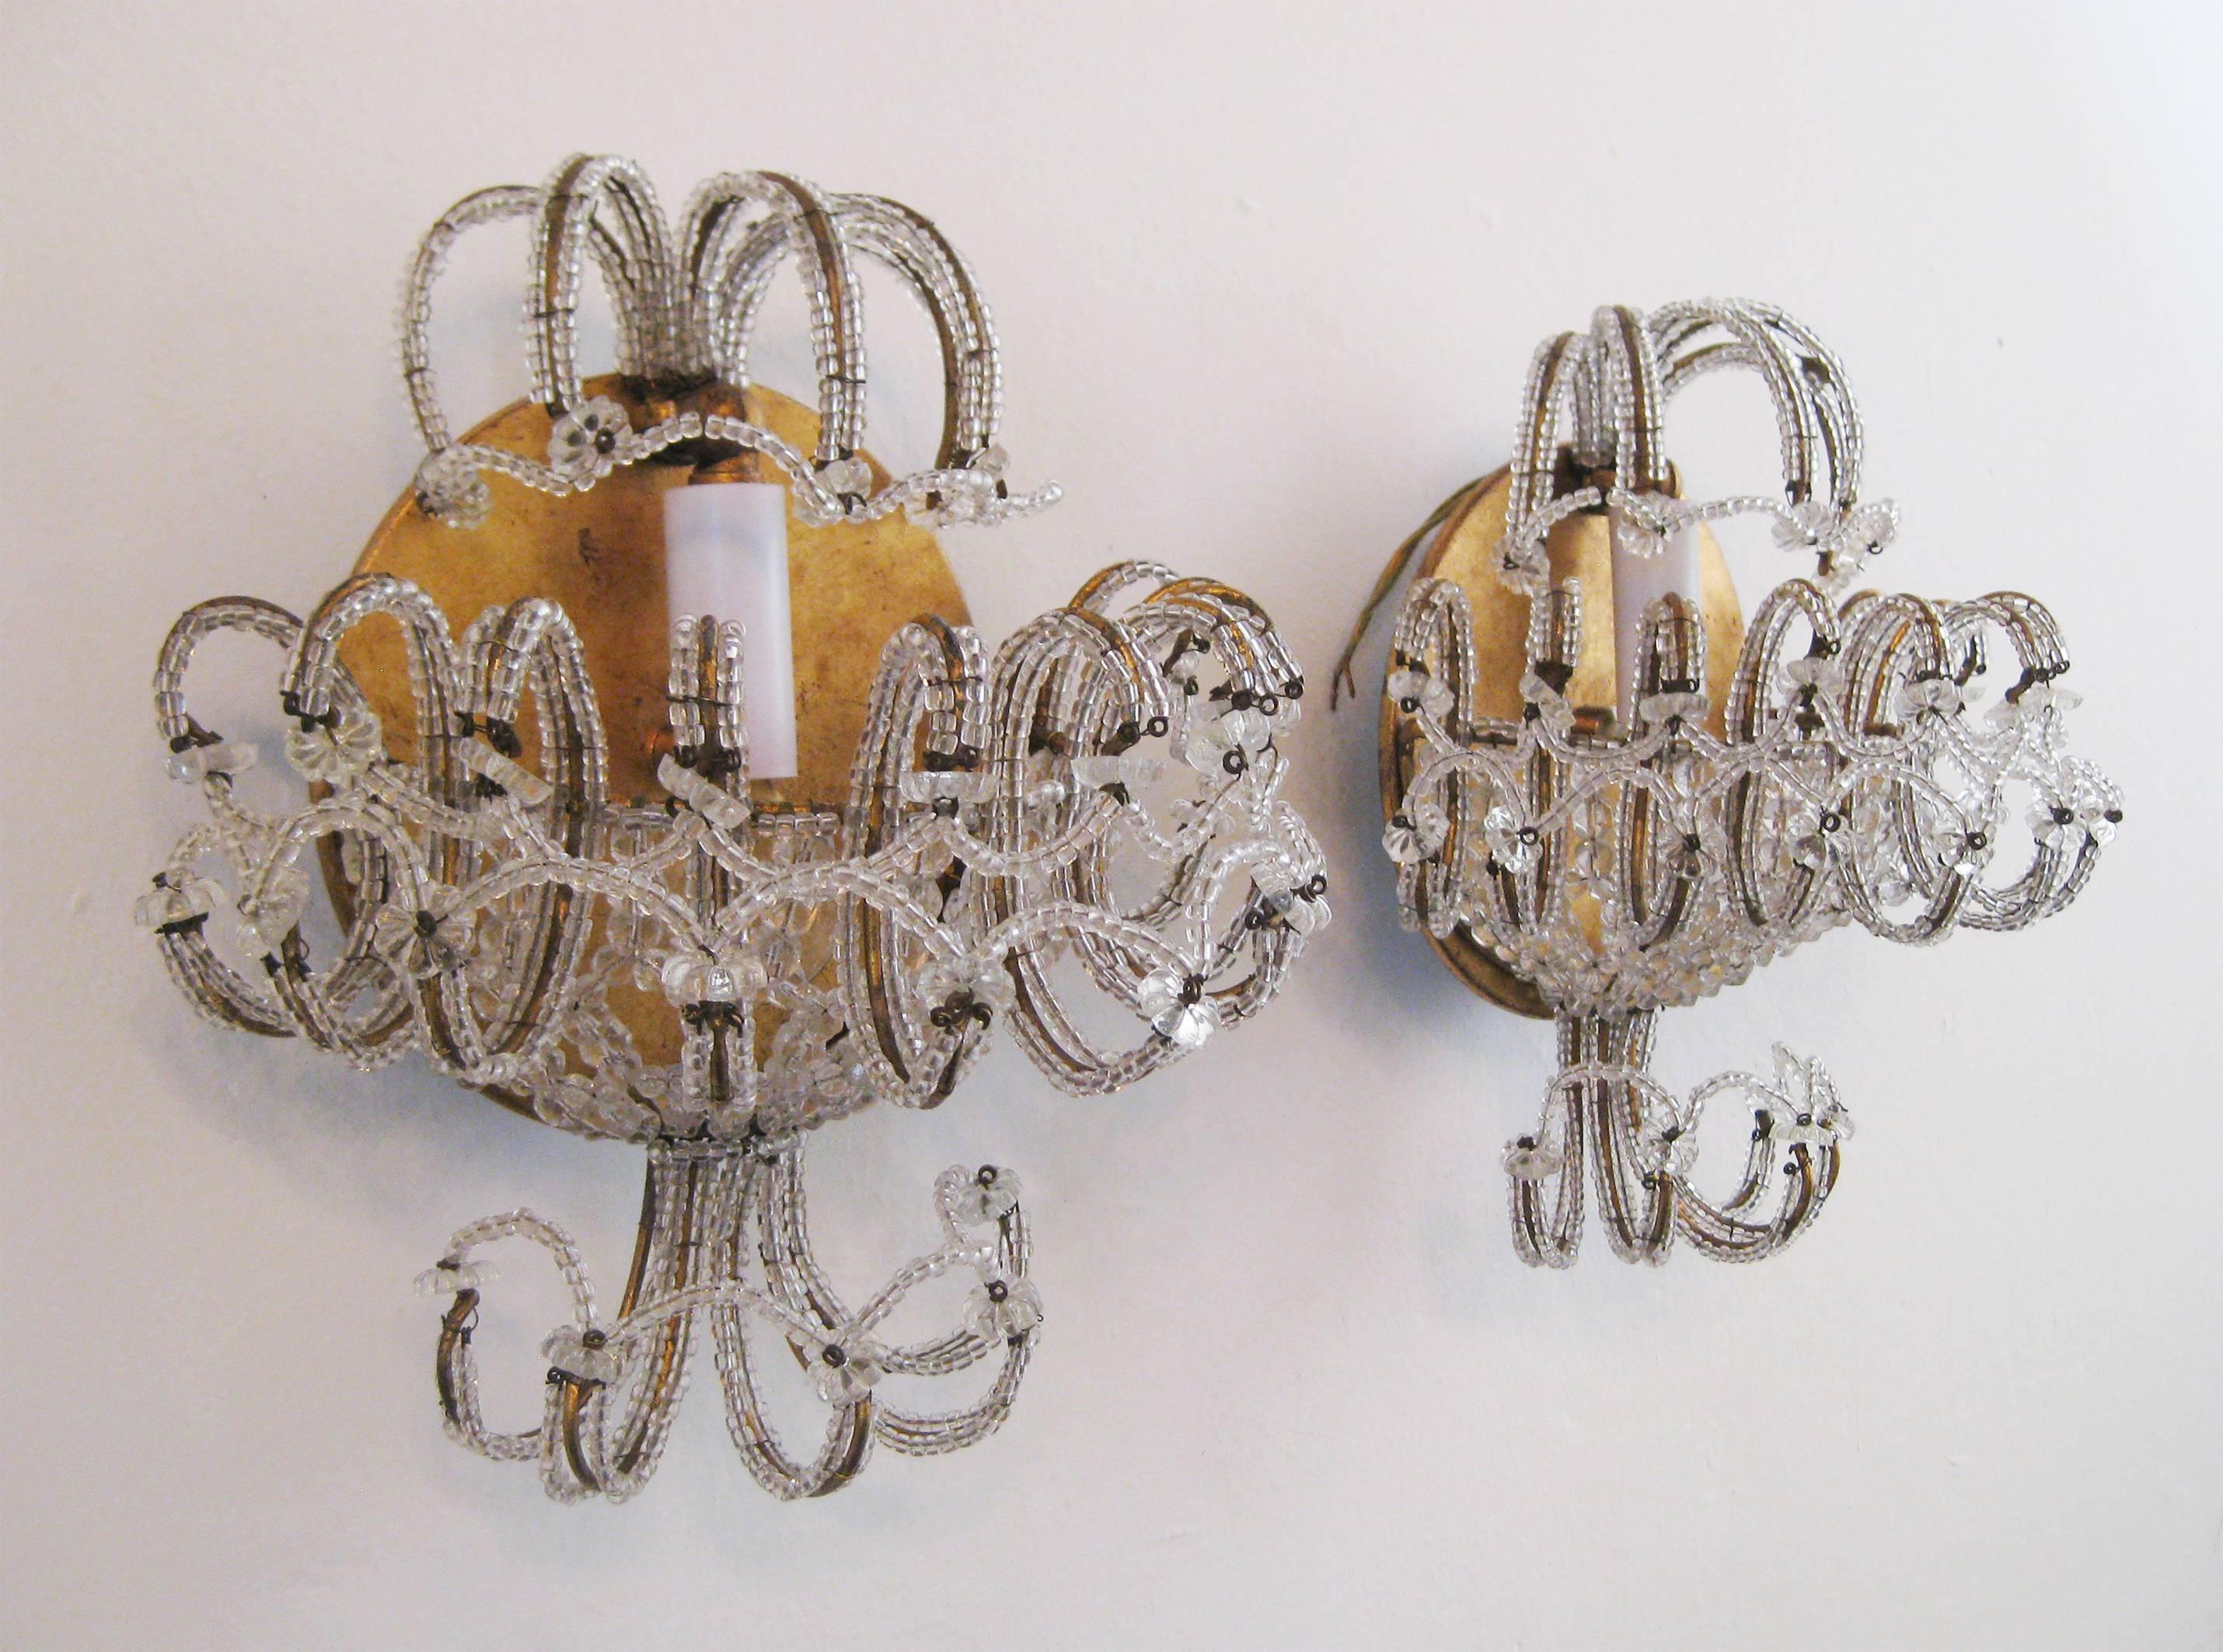 Golden wall lamps trimmed in glass beads, Hollywood Regency style. Signed 